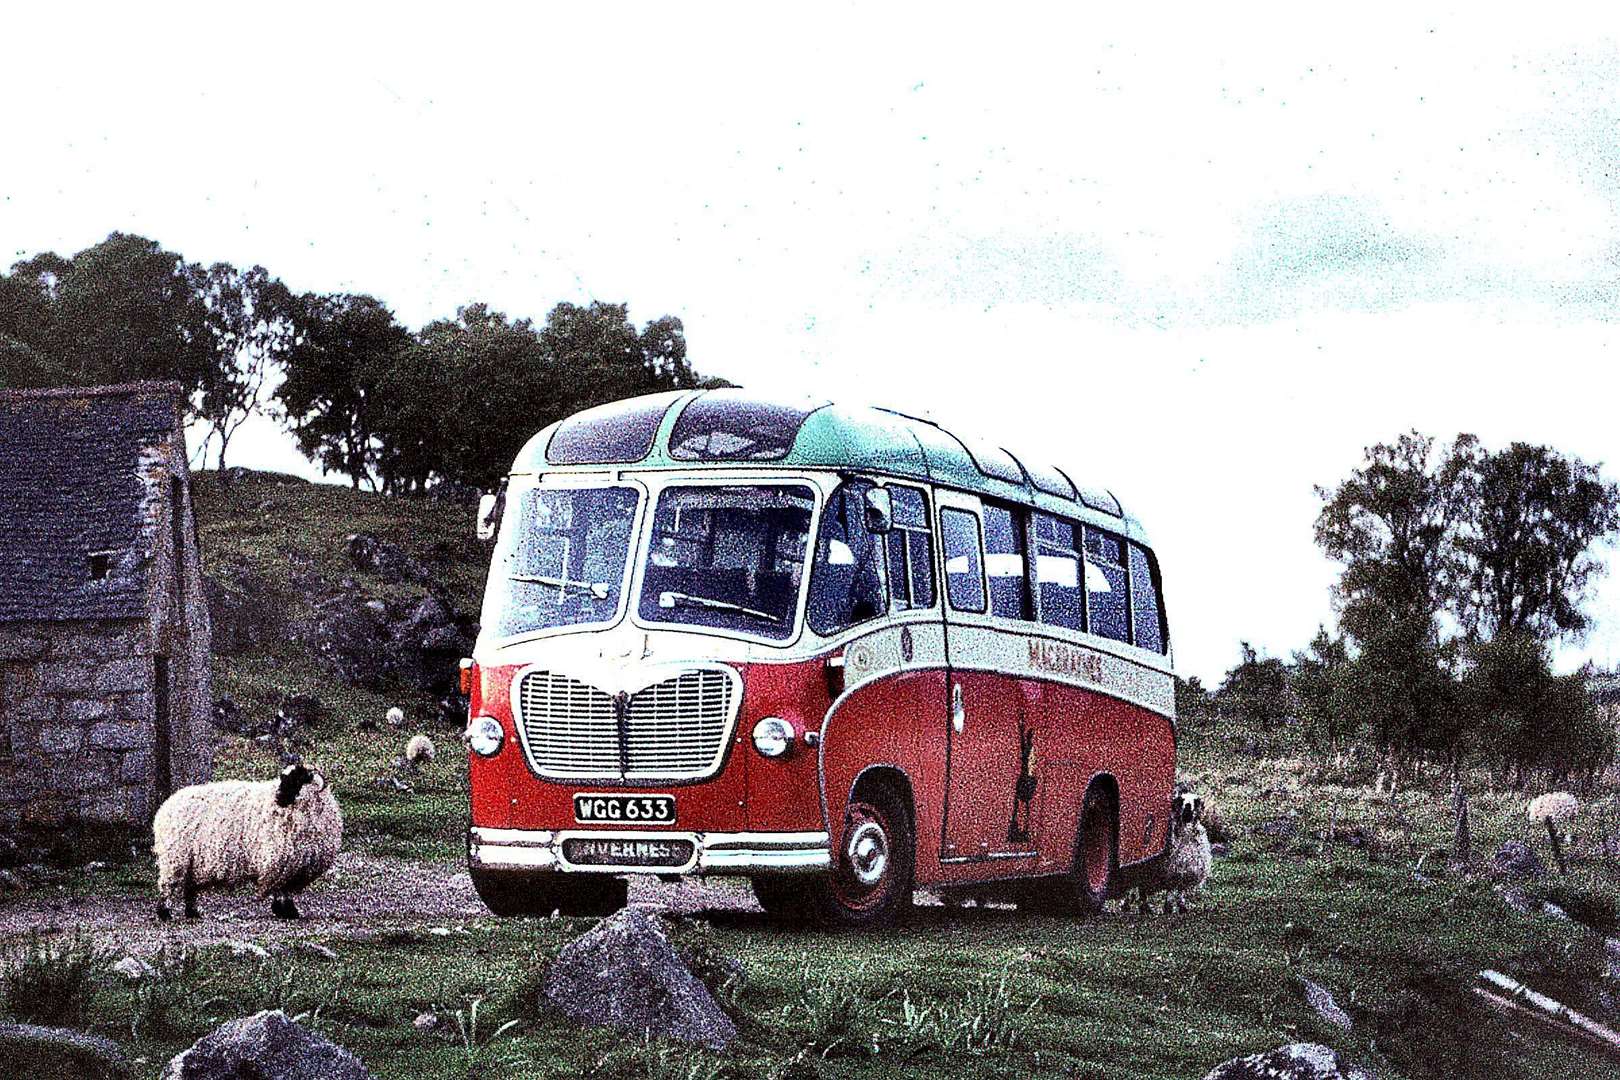 A Bedford bus pictured at Whitebridge in 1966.